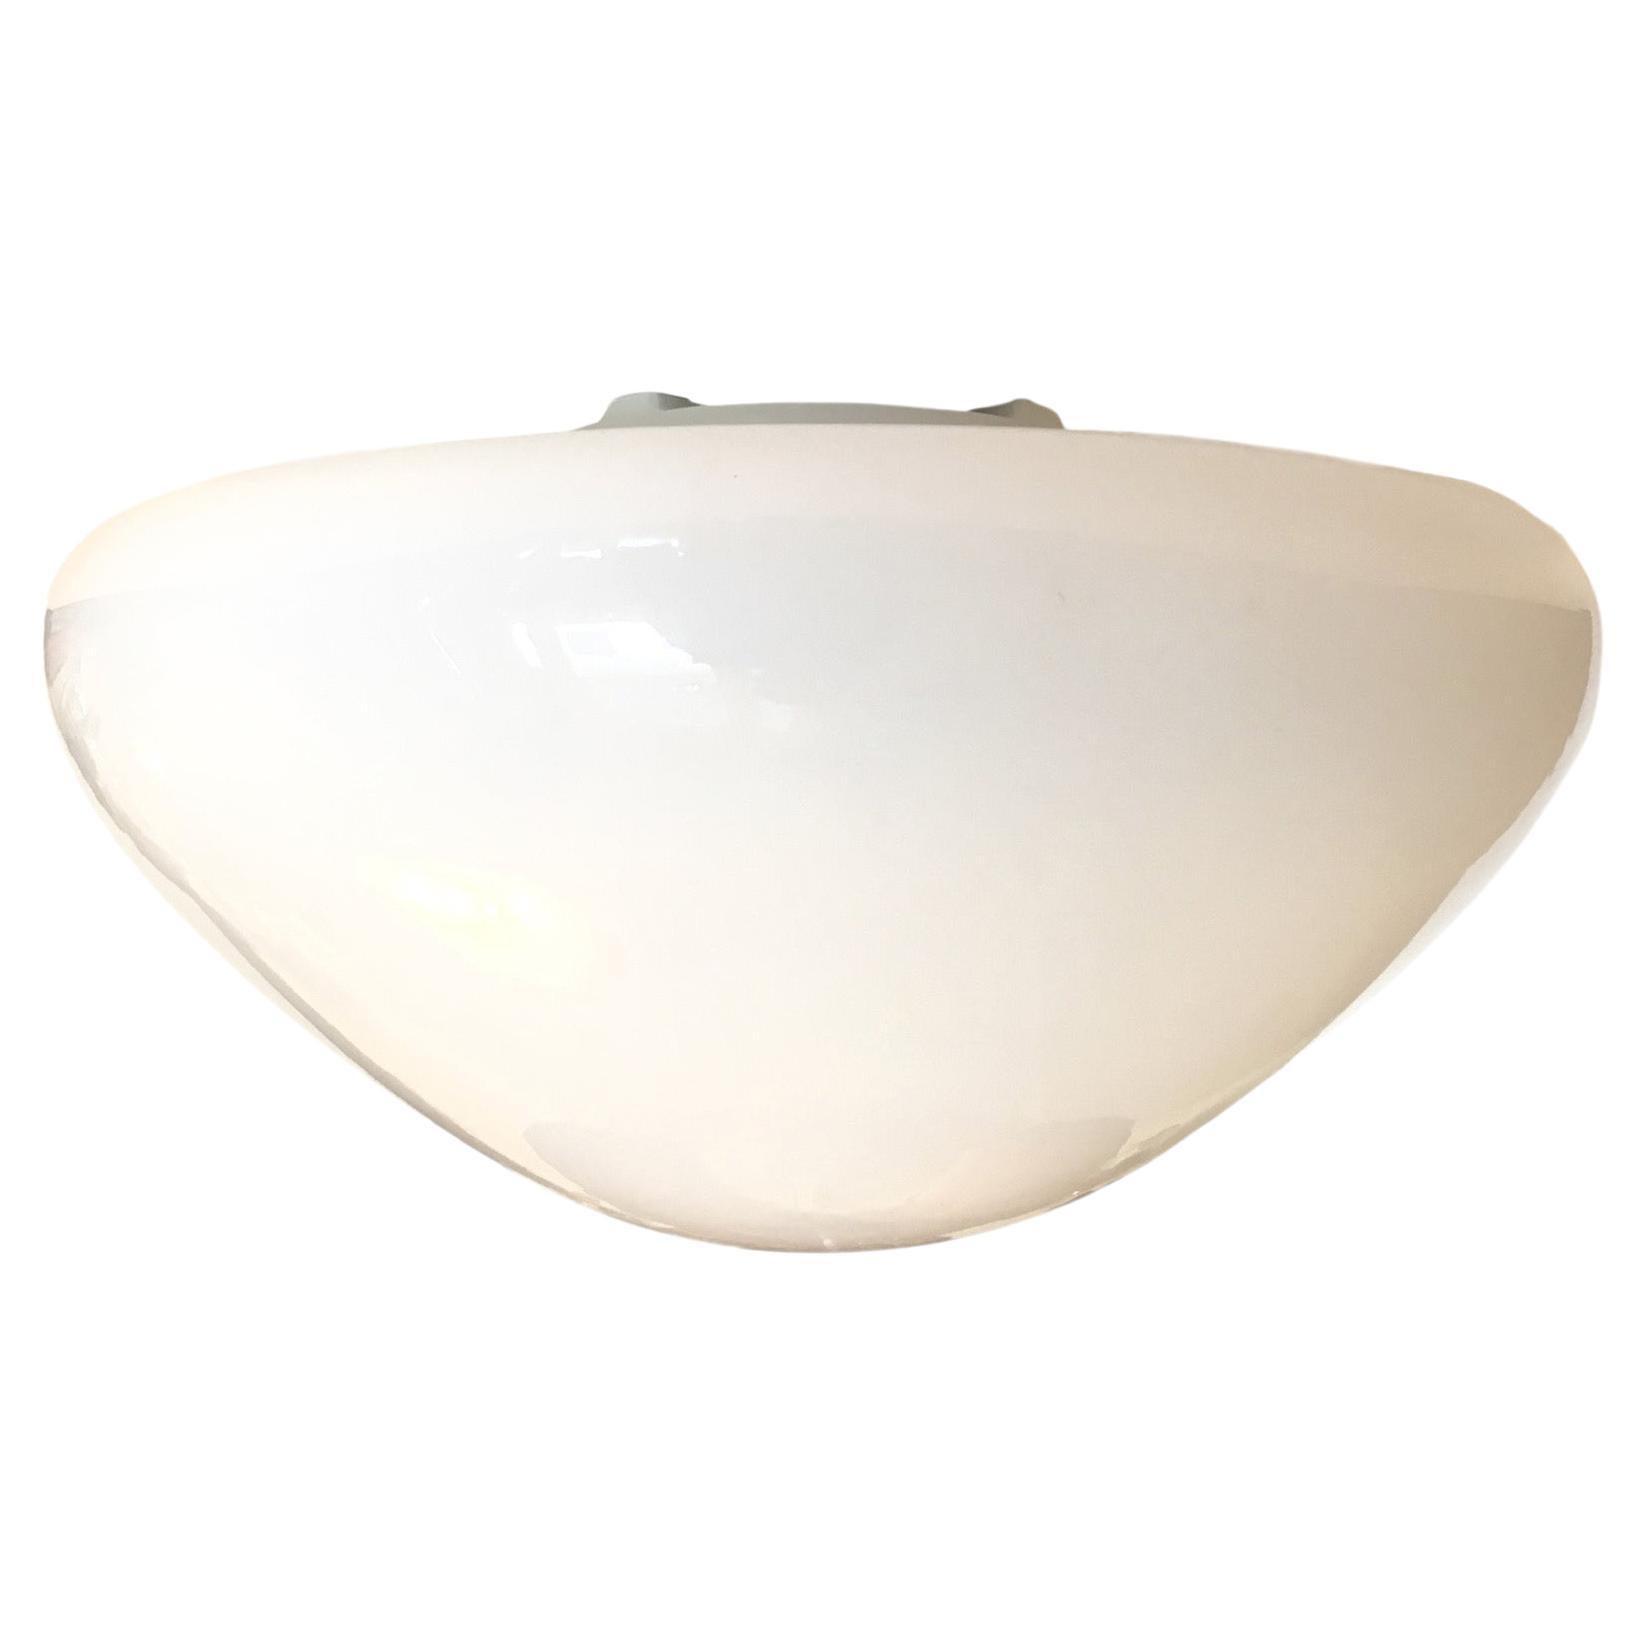 Bauhaus Wagenfeld Wall Sconce or Ceiling Light, Germany, 1955 For Sale